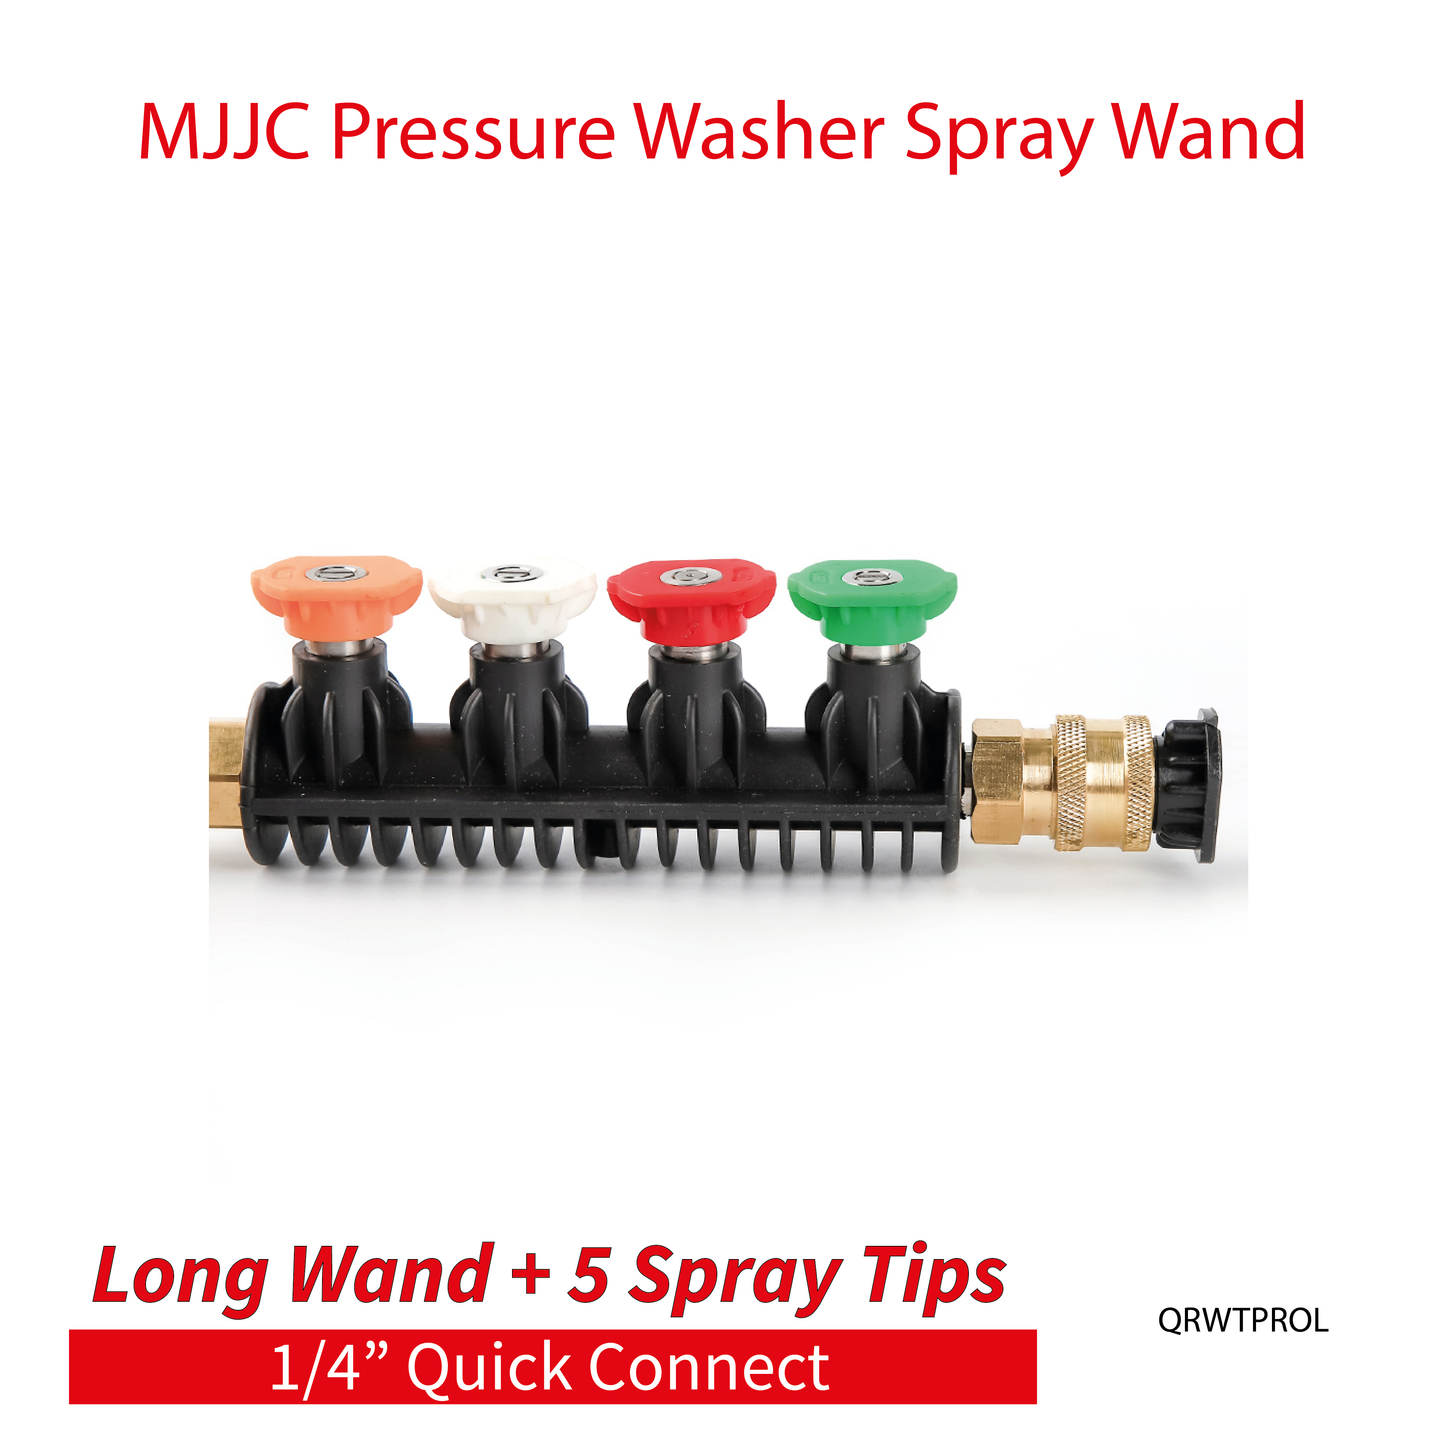 MJJC Light Weight Pressure Washer Long Spray Wand 1/4" Quick Connect